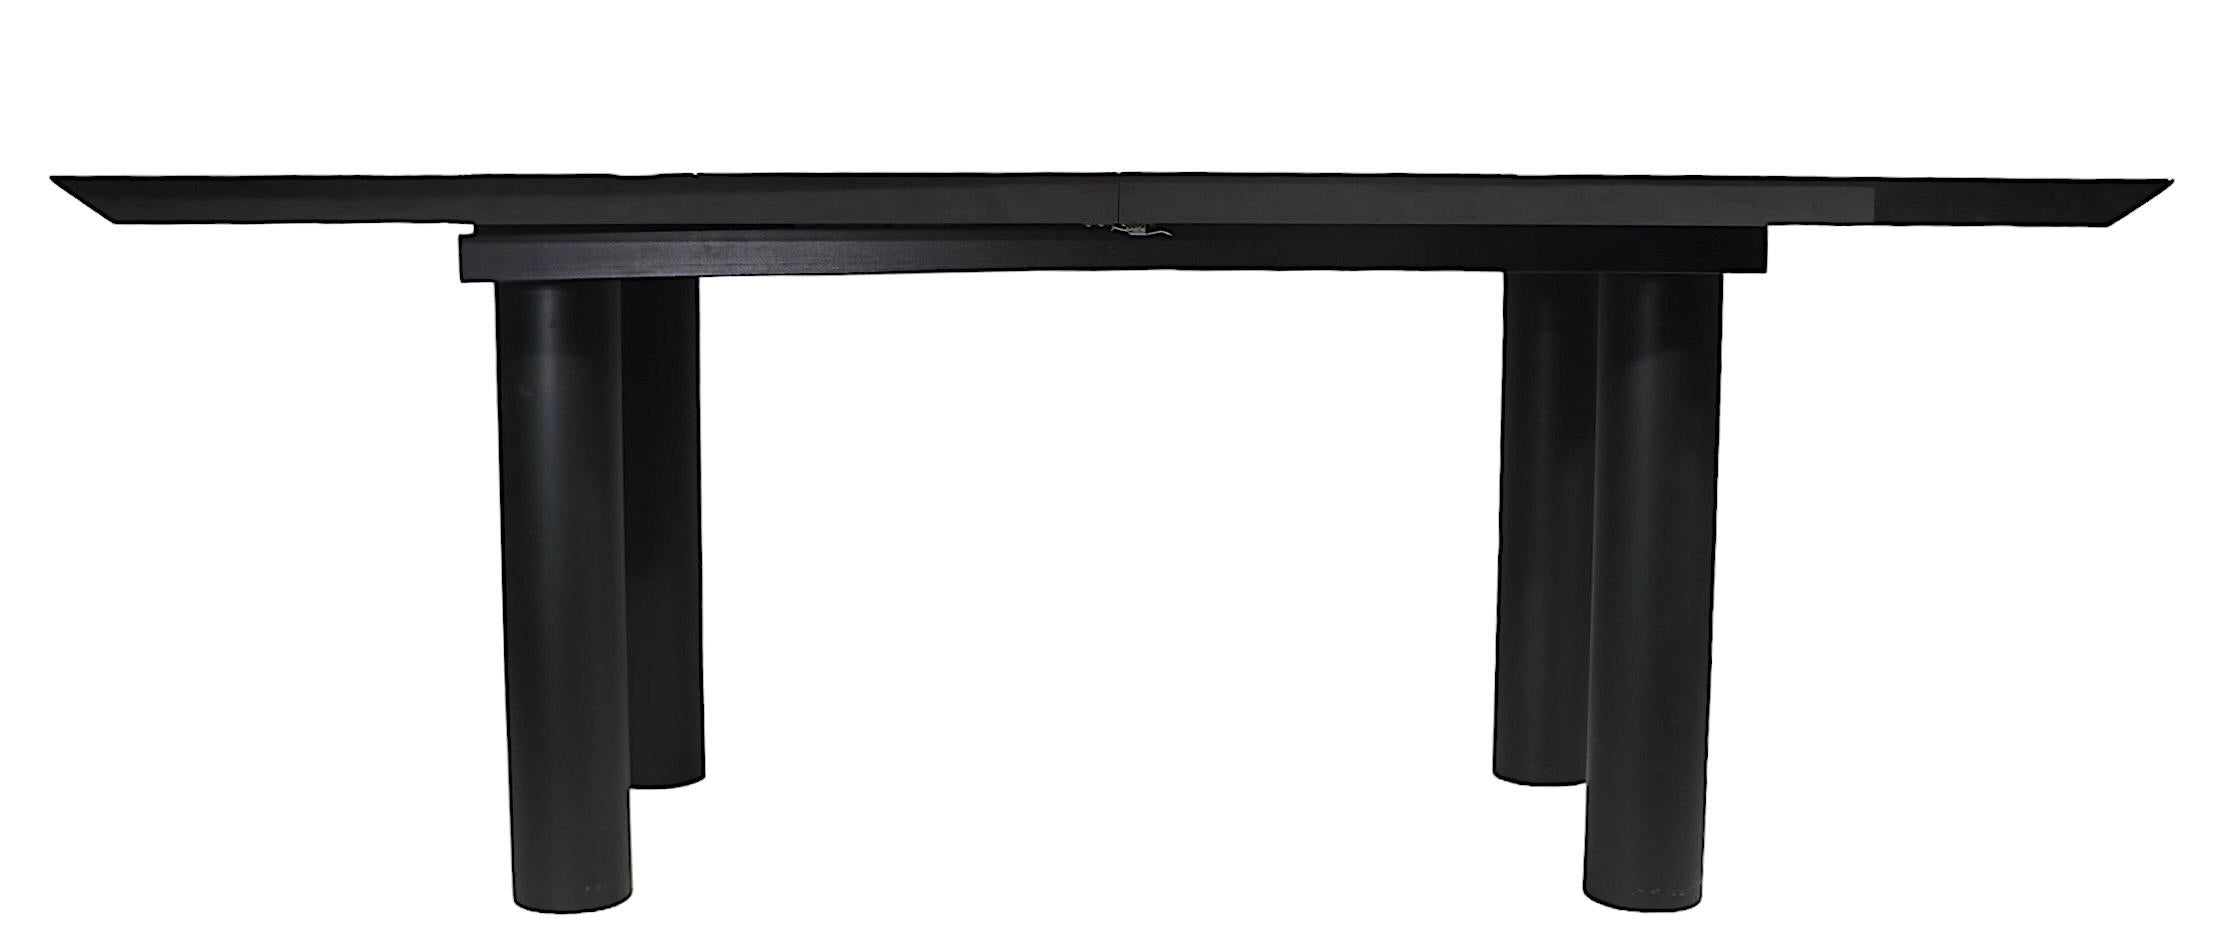 Italian Post Modern Dining Table by Oscar Dell Arredamento for Miniforms c 1970s For Sale 8